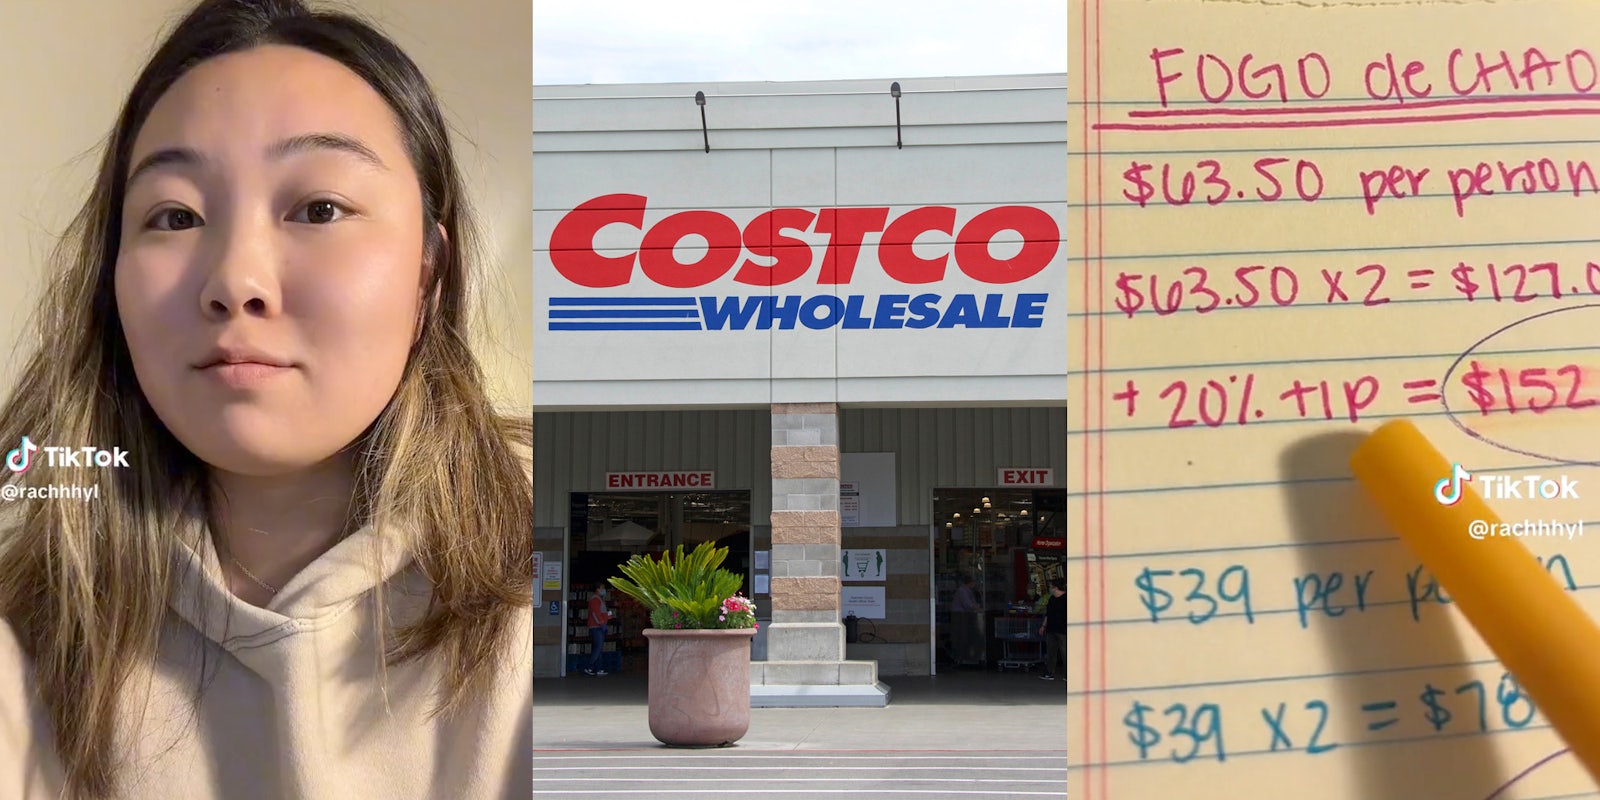 Woman looking at camera(l), Costco storefront(c), Sheet with money math problems(r)